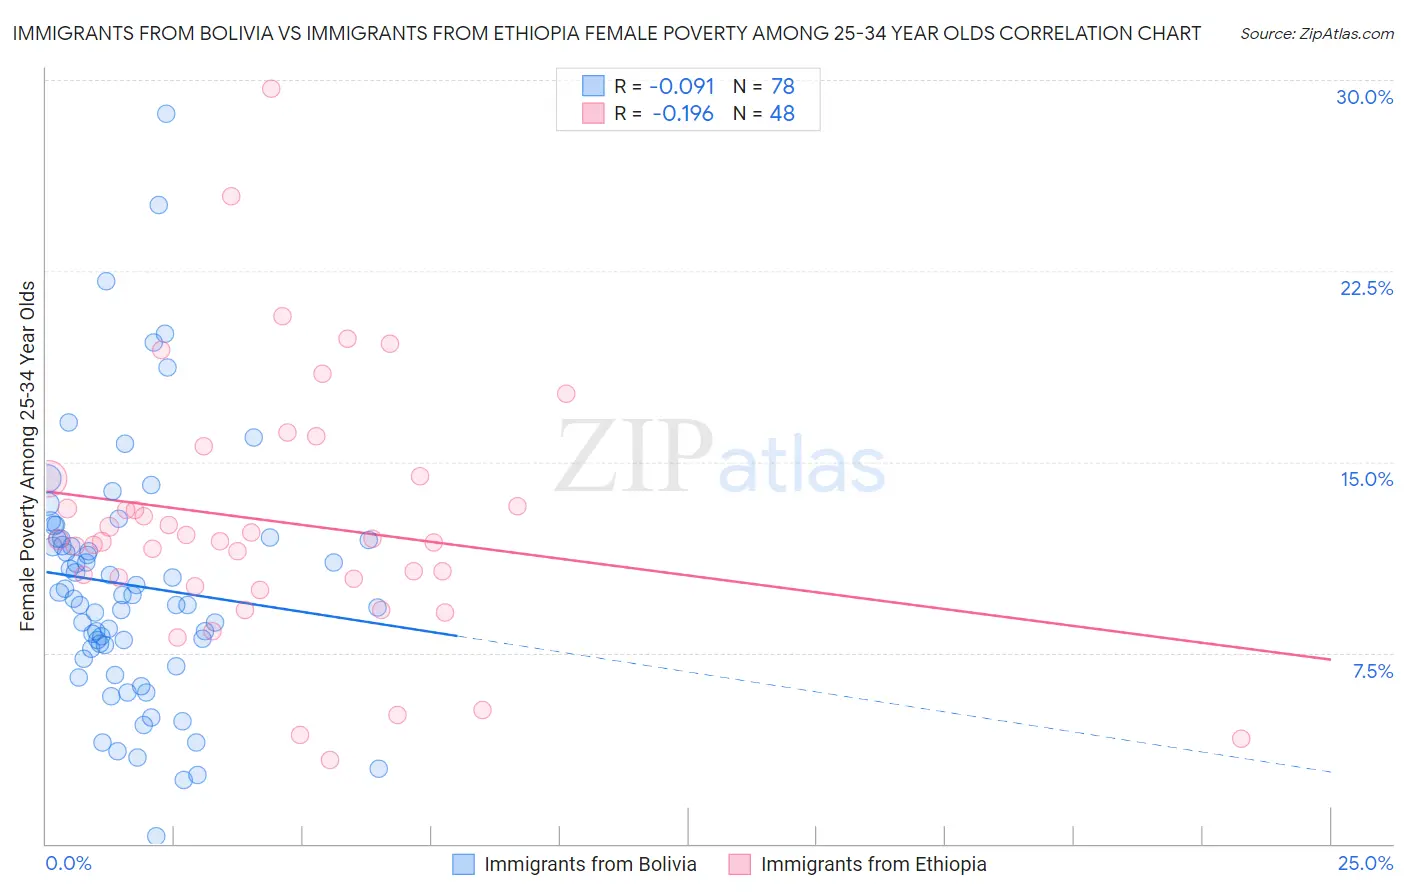 Immigrants from Bolivia vs Immigrants from Ethiopia Female Poverty Among 25-34 Year Olds